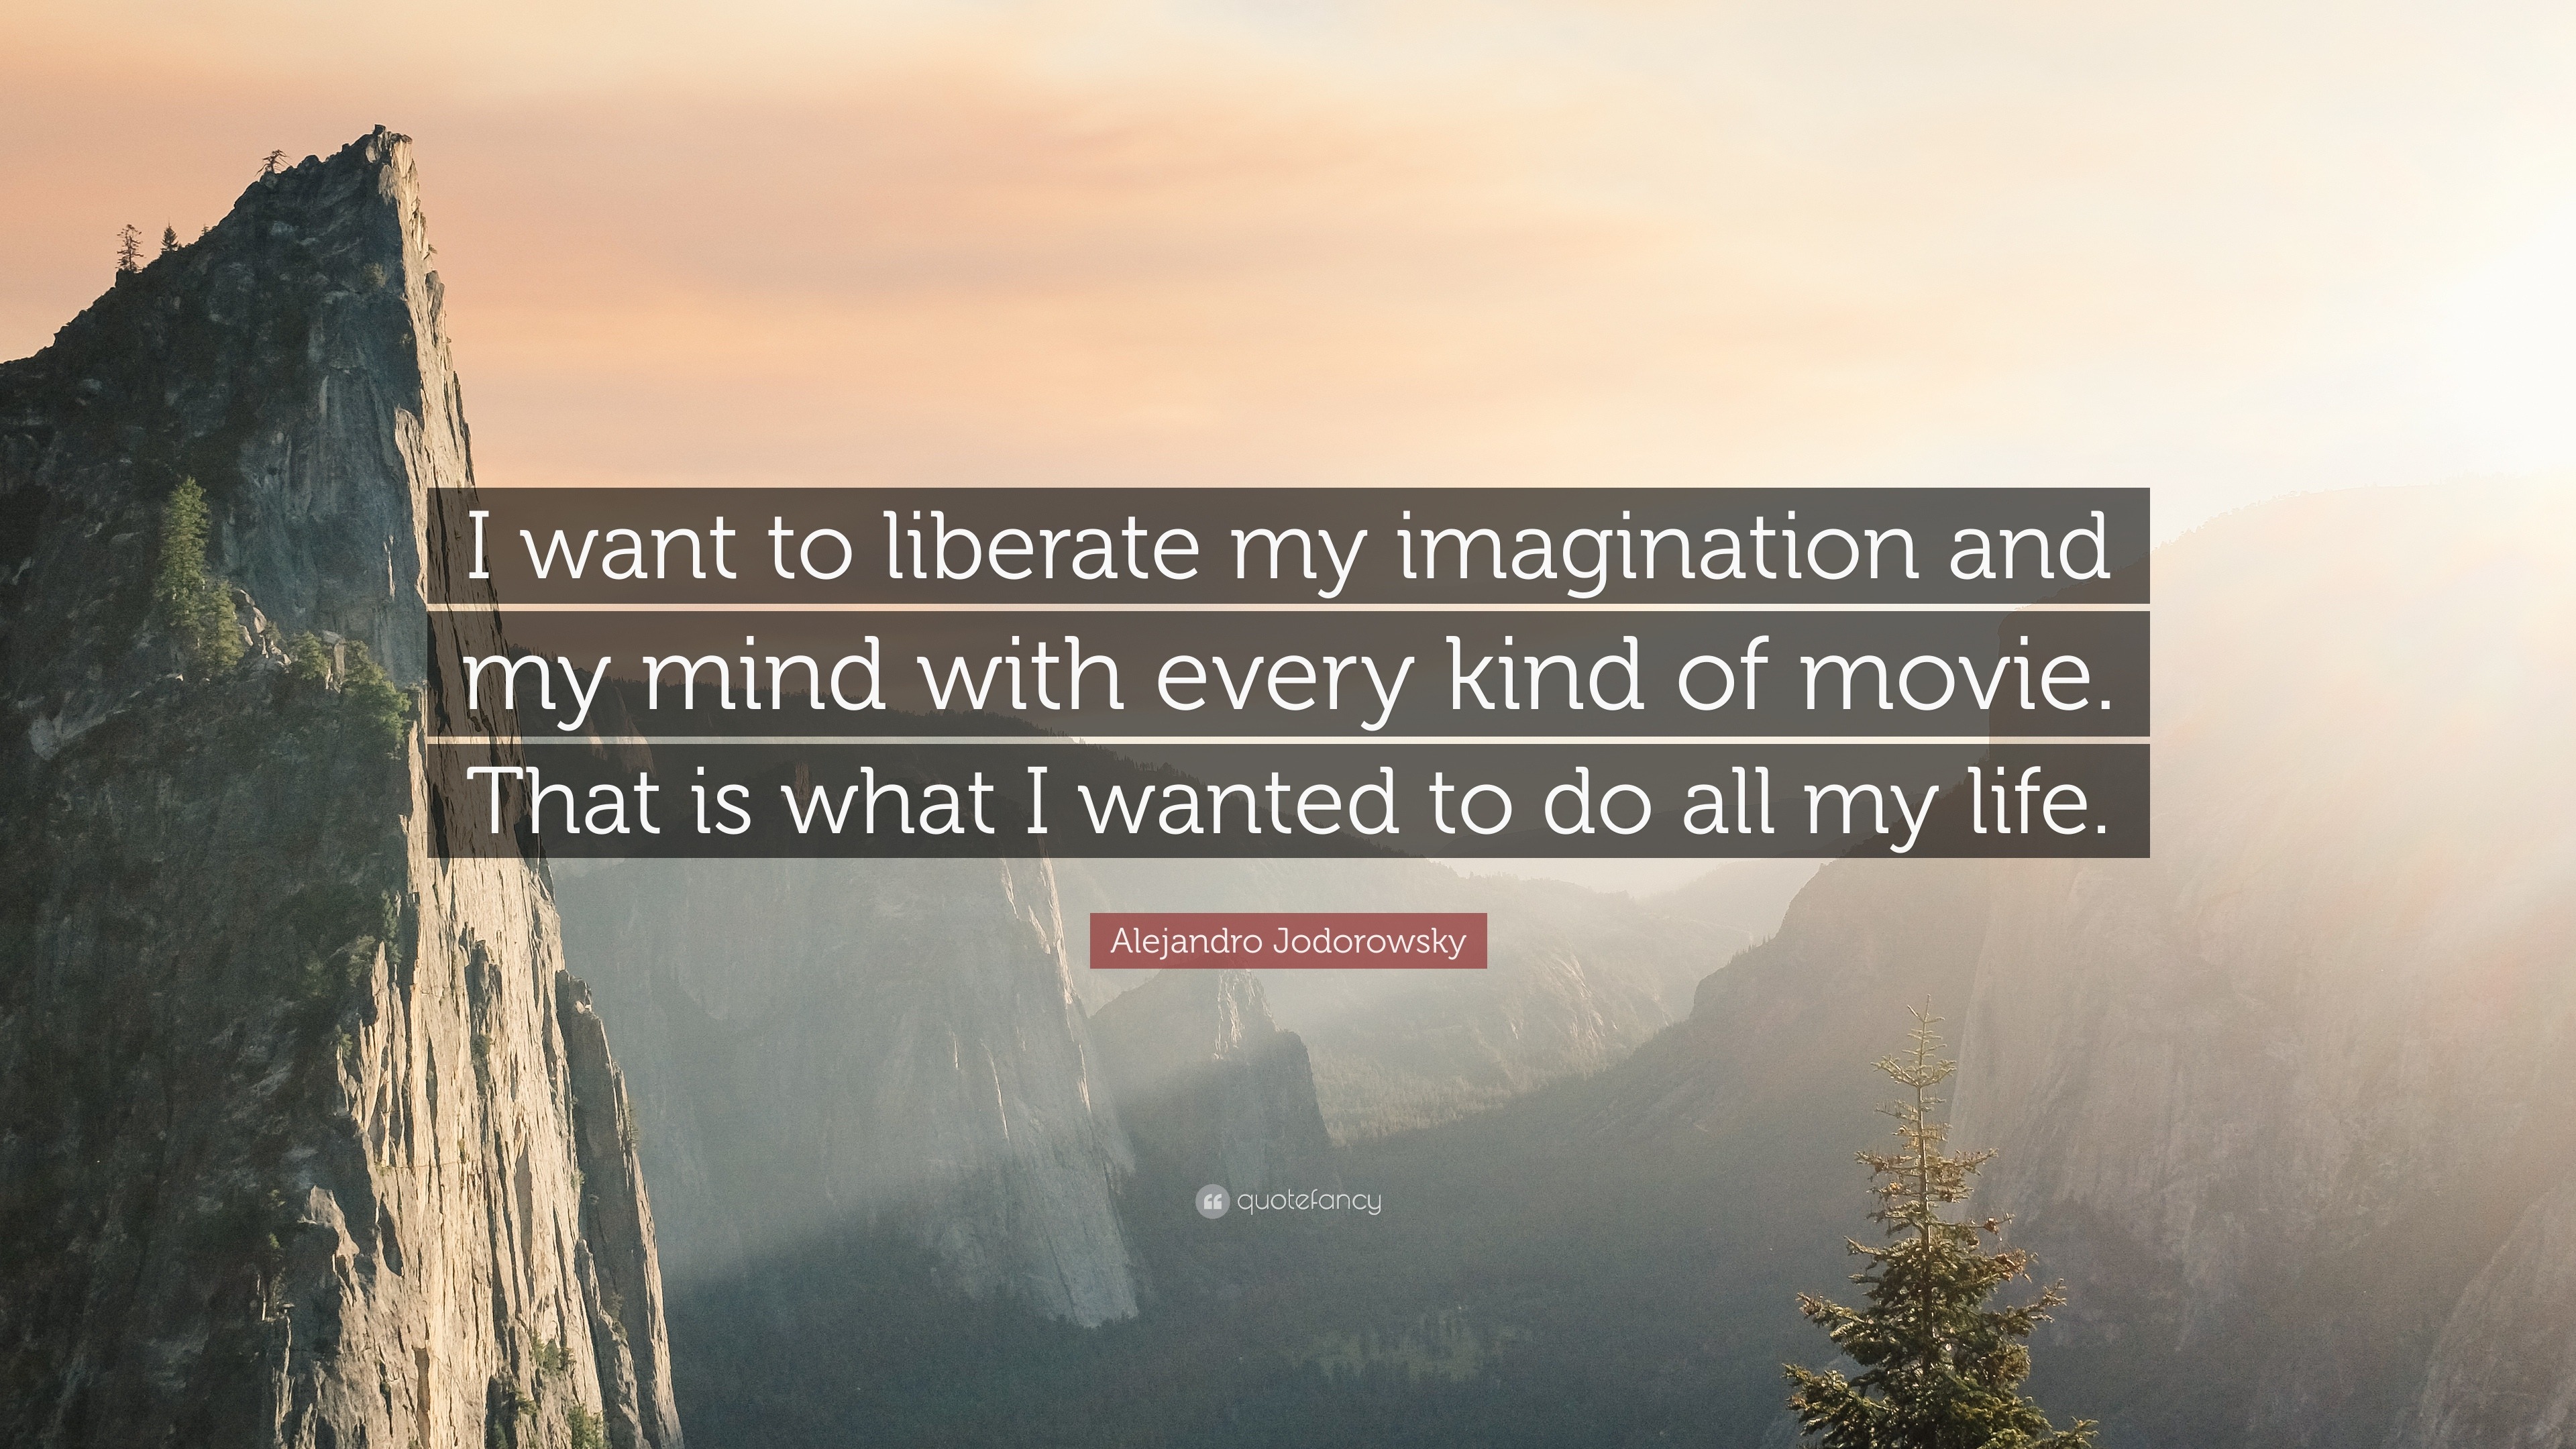 Alejandro Jodorowsky Quote “I want to liberate my imagination and my mind with every